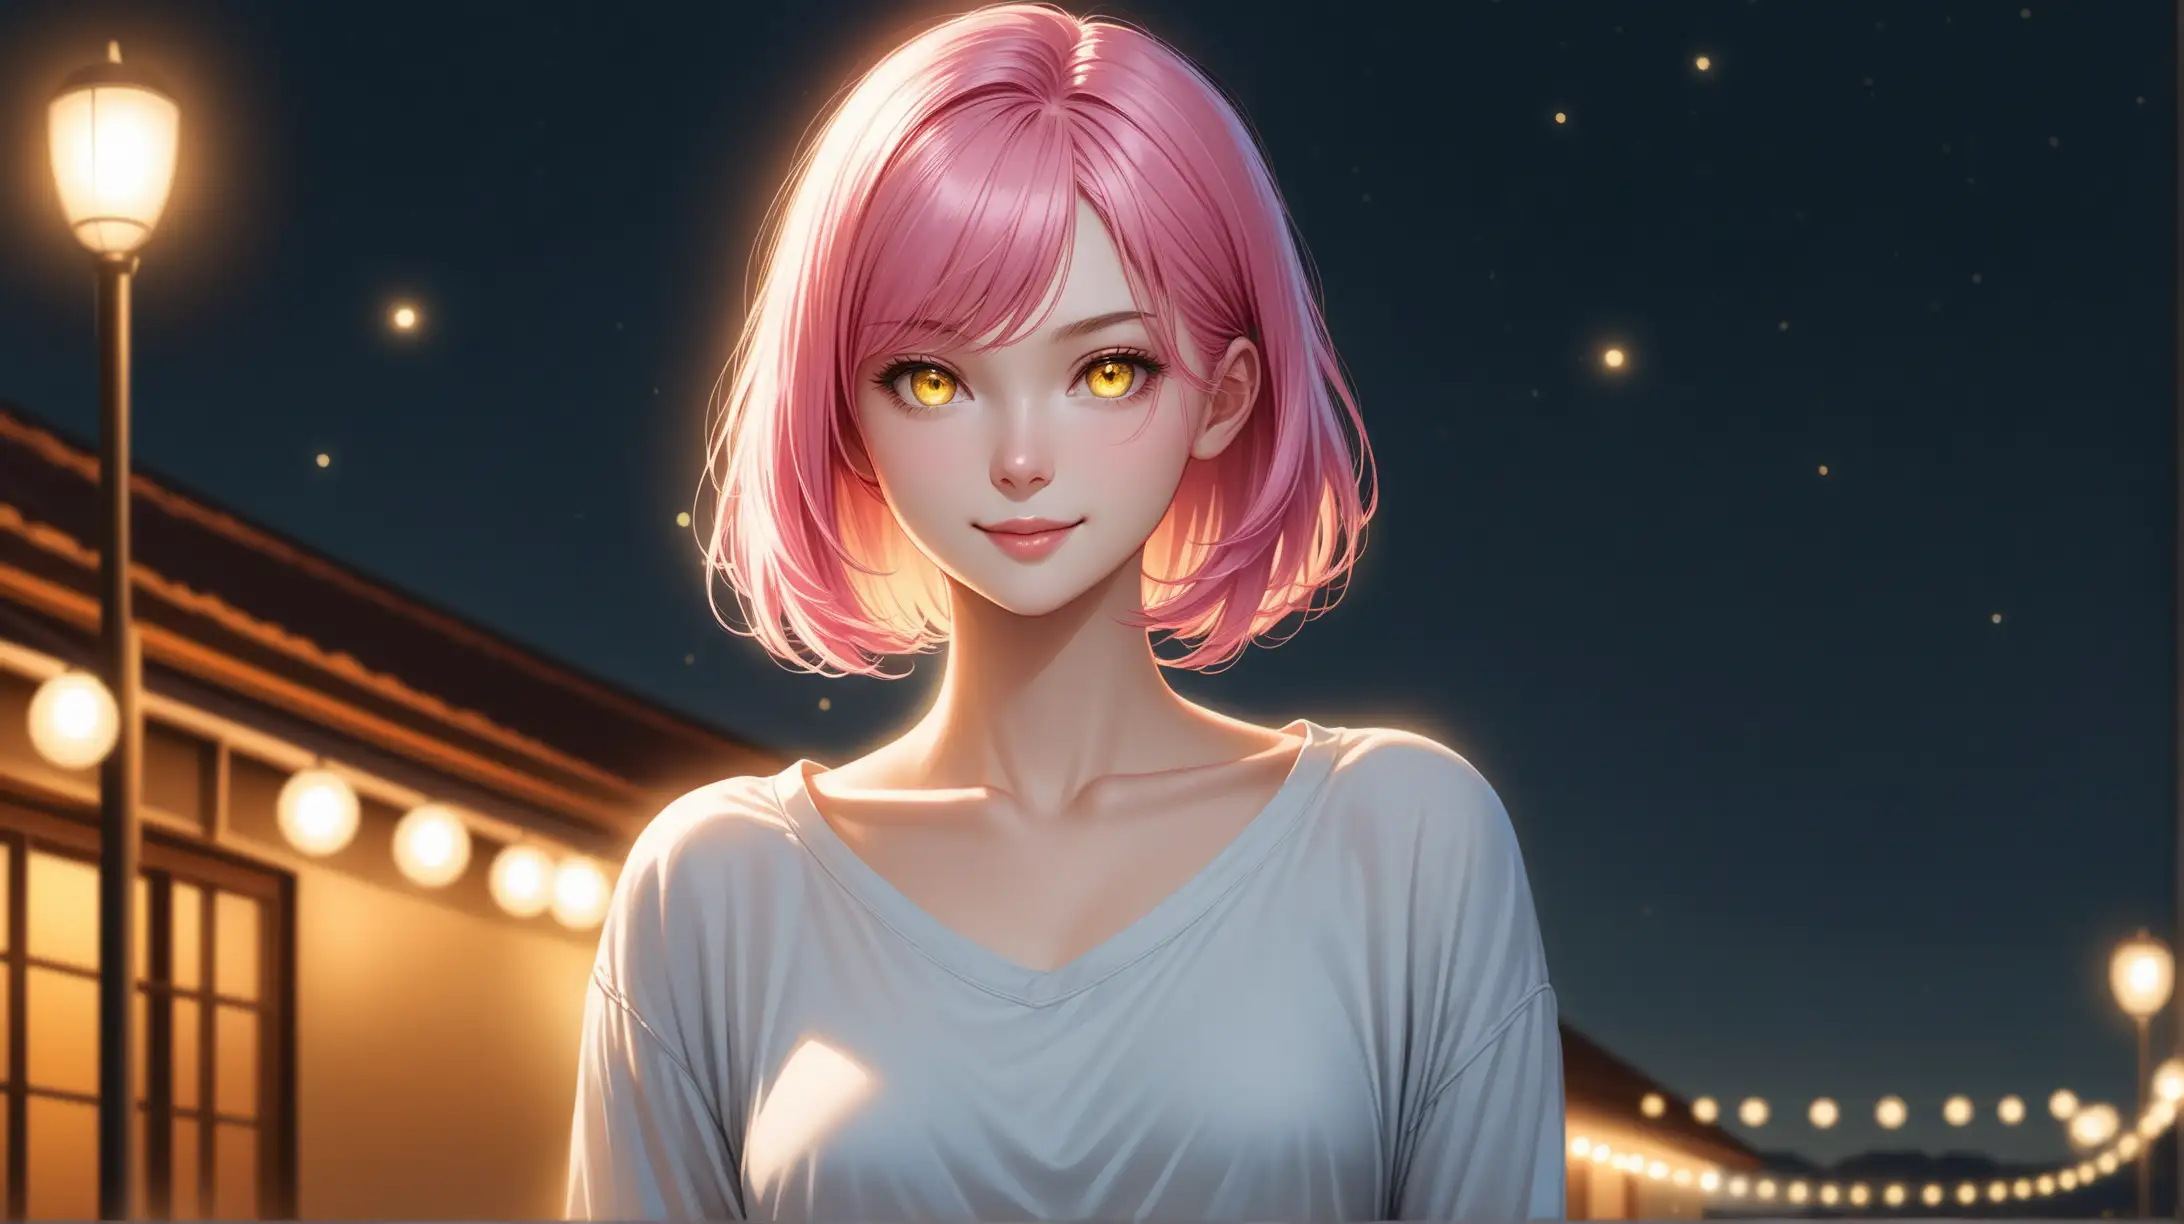 Draw a woman, short pink hair, yellow ringed eyes, slender figure, high quality, realistic, accurate, detailed, long shot, outdoors, night lighting, relaxed outfit, seductive pose, smiling toward viewer